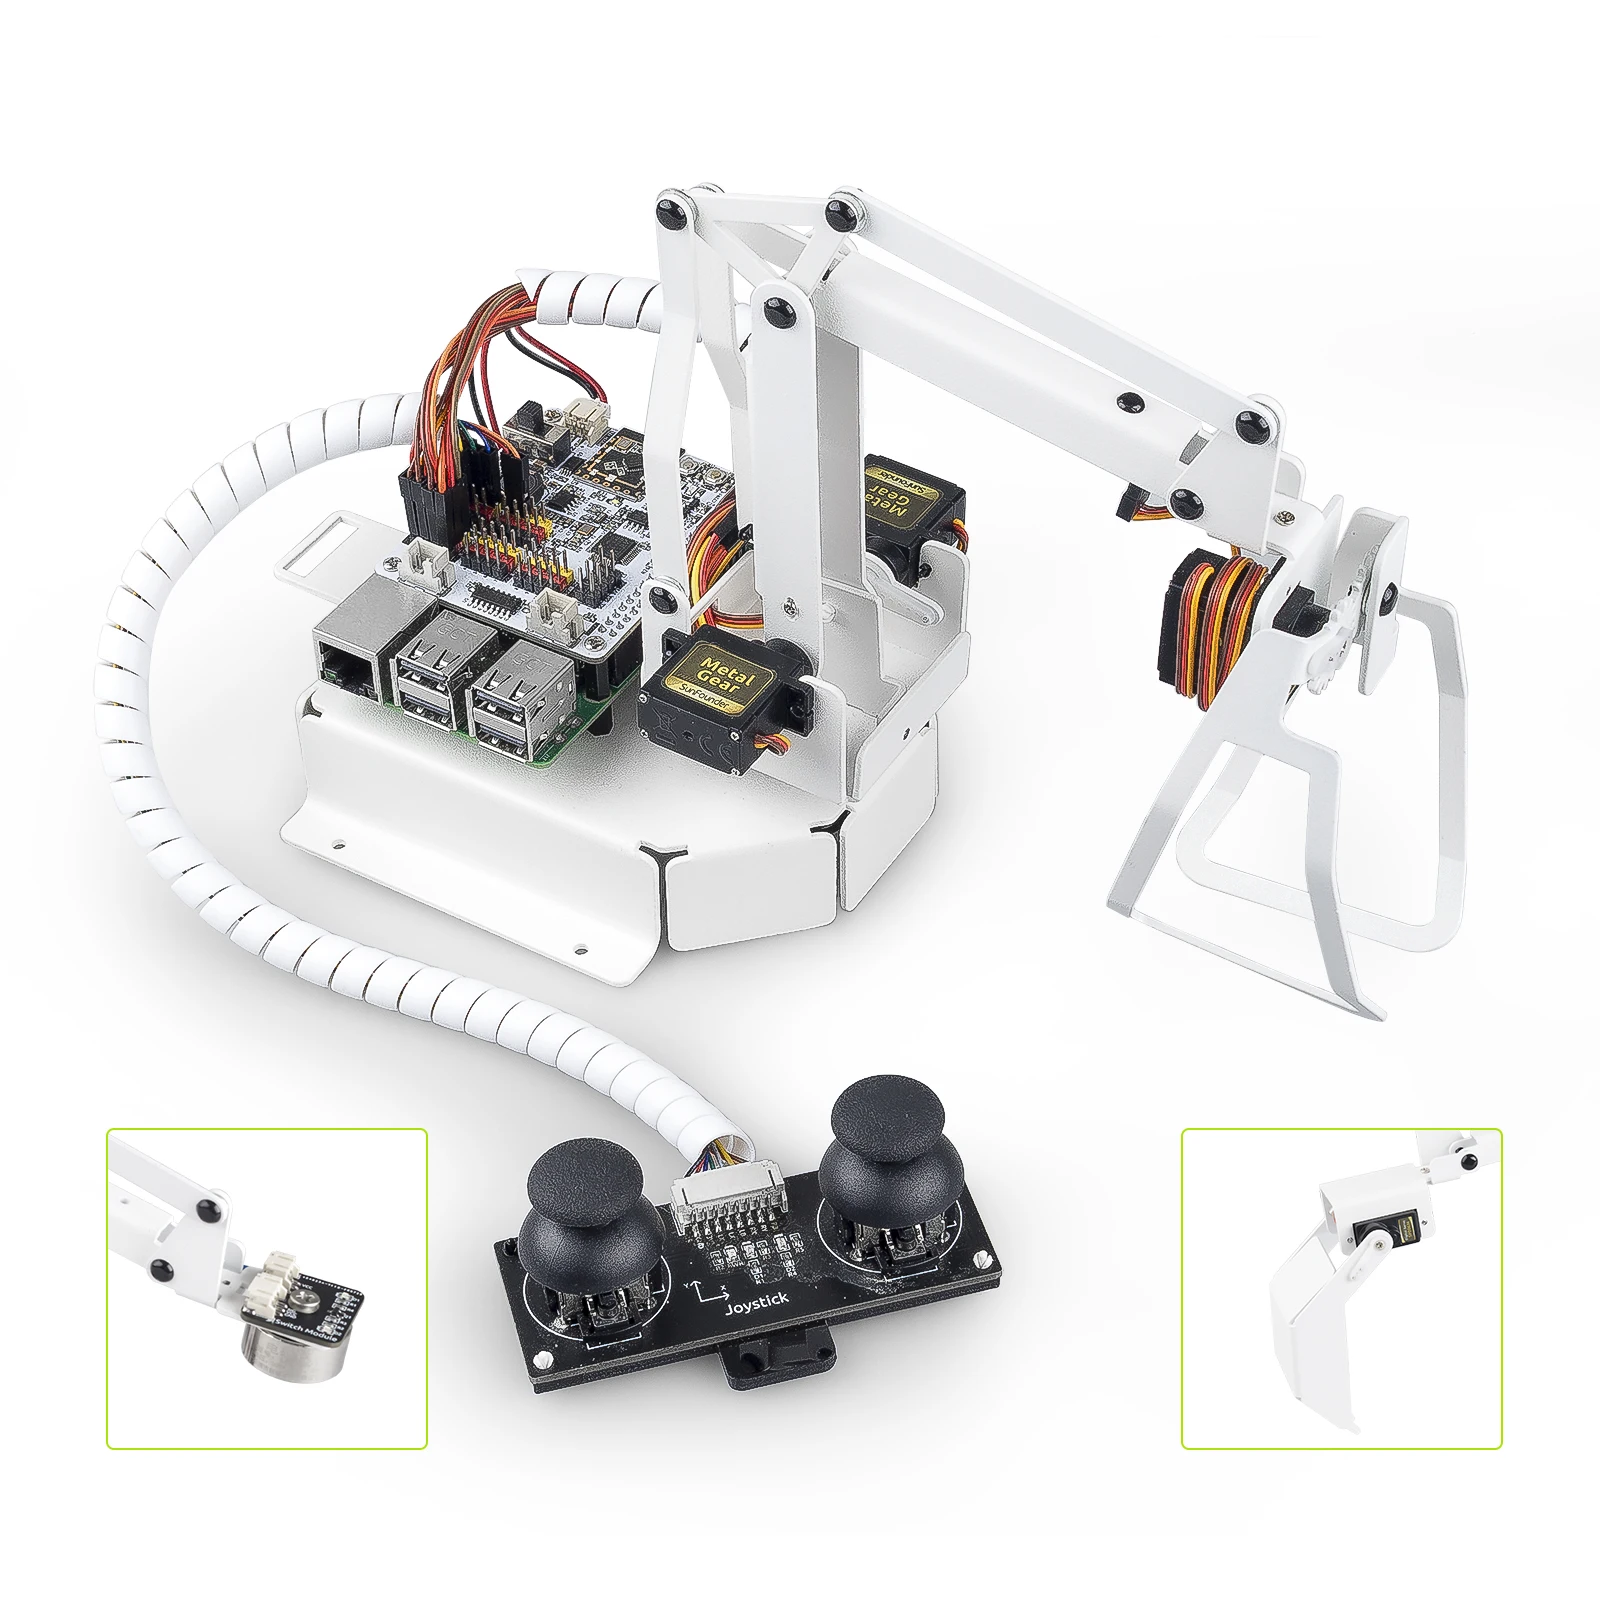 SunFounder 3+1 DOF Robot Arm Kit with Shovel Bucket, Hanging Clips, Electromagnet, Support Graphical Visual Programming, Python,